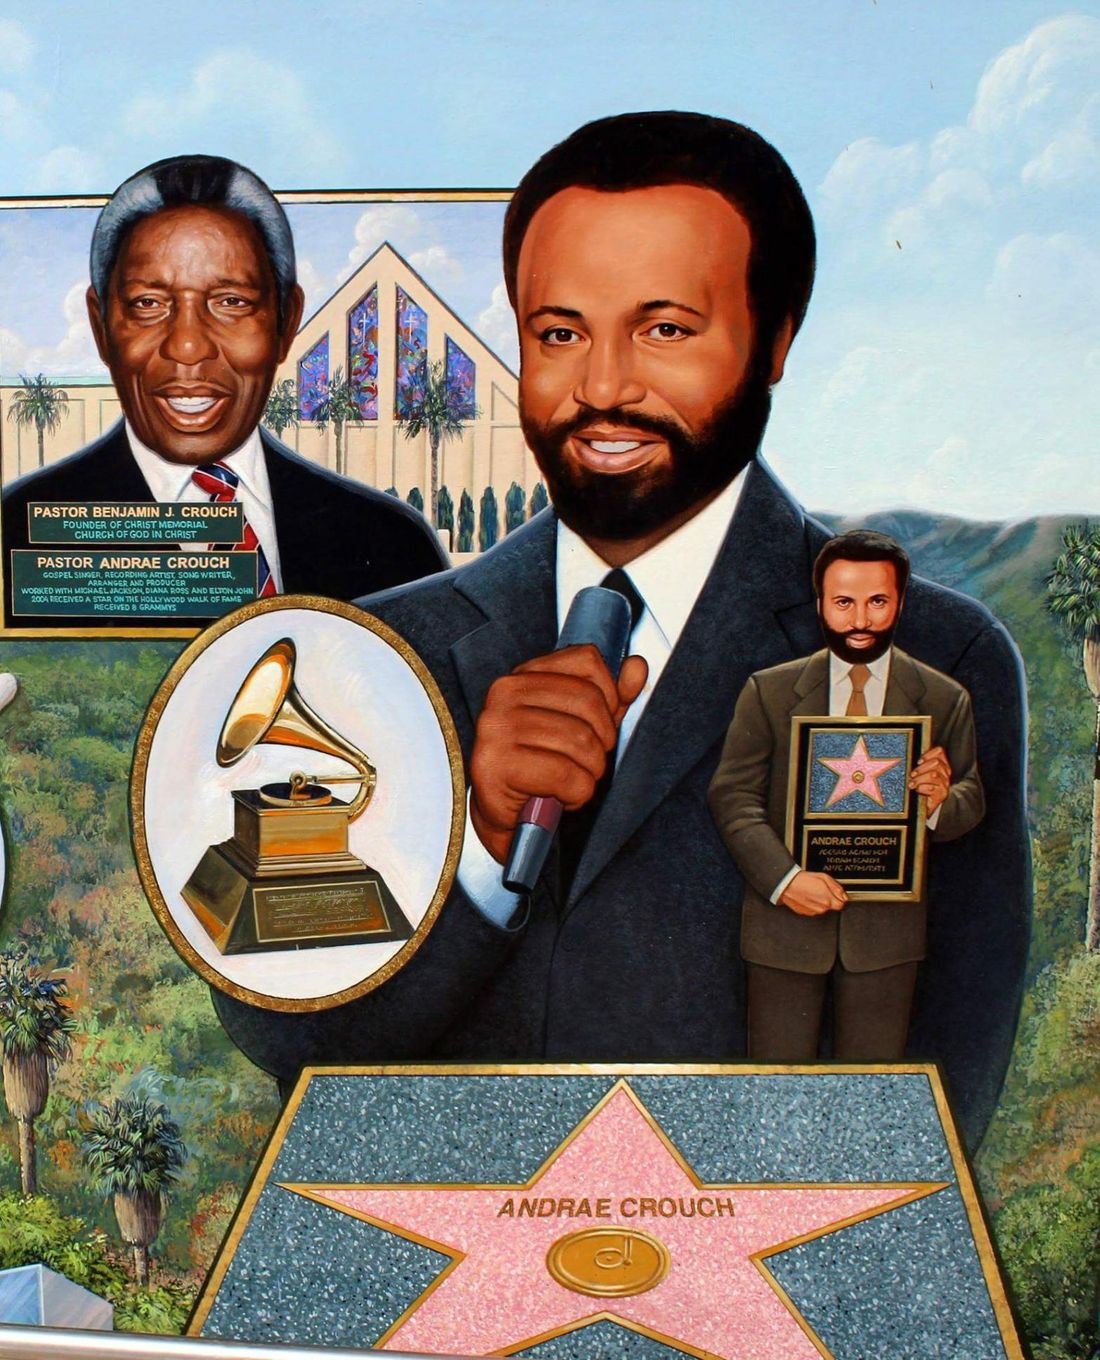 Bishop Crouch and Andrae Crouch
